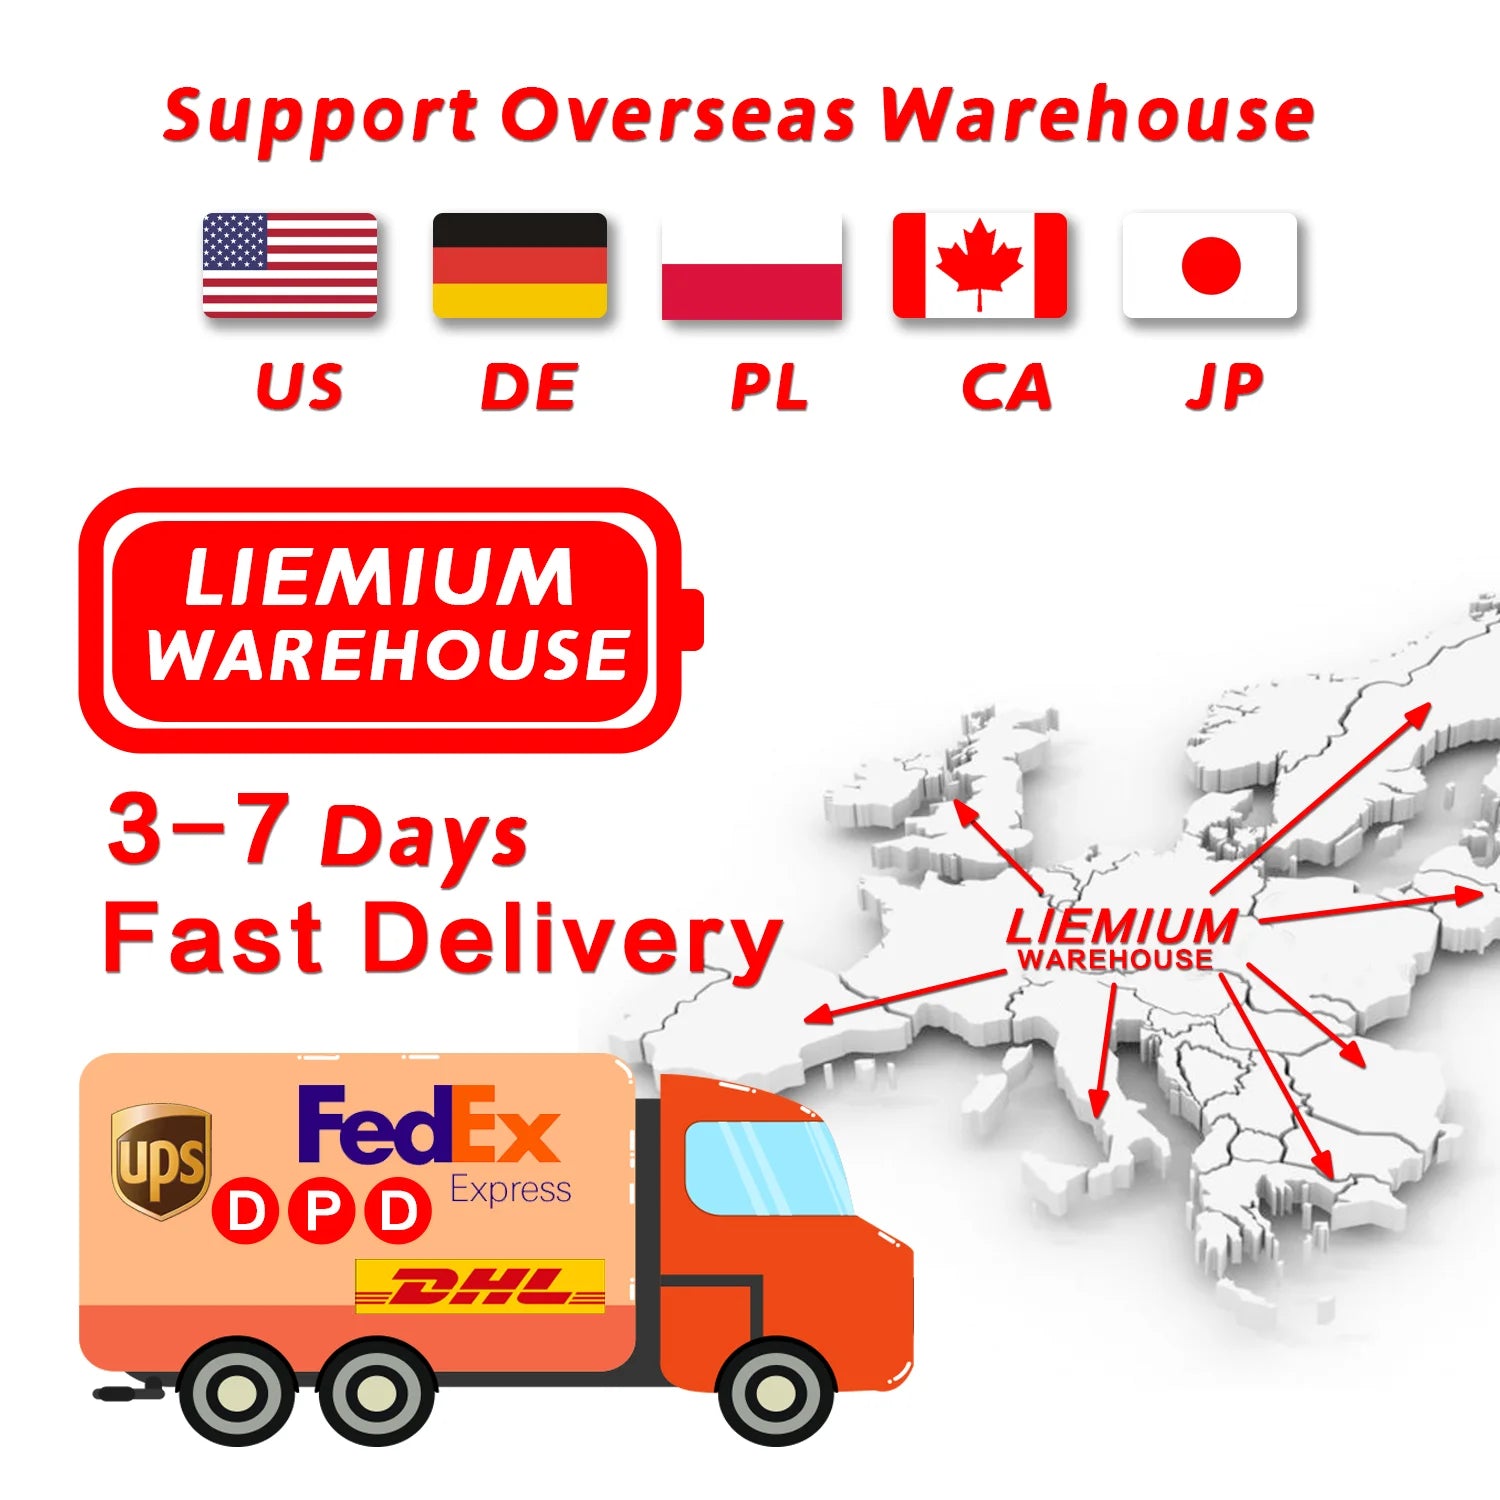 New 12V 50Ah 40Ah LiFePO4 Battery, Global delivery from 5 warehouses, with fast shipping via FedEx (UPS) in 3-7 days.